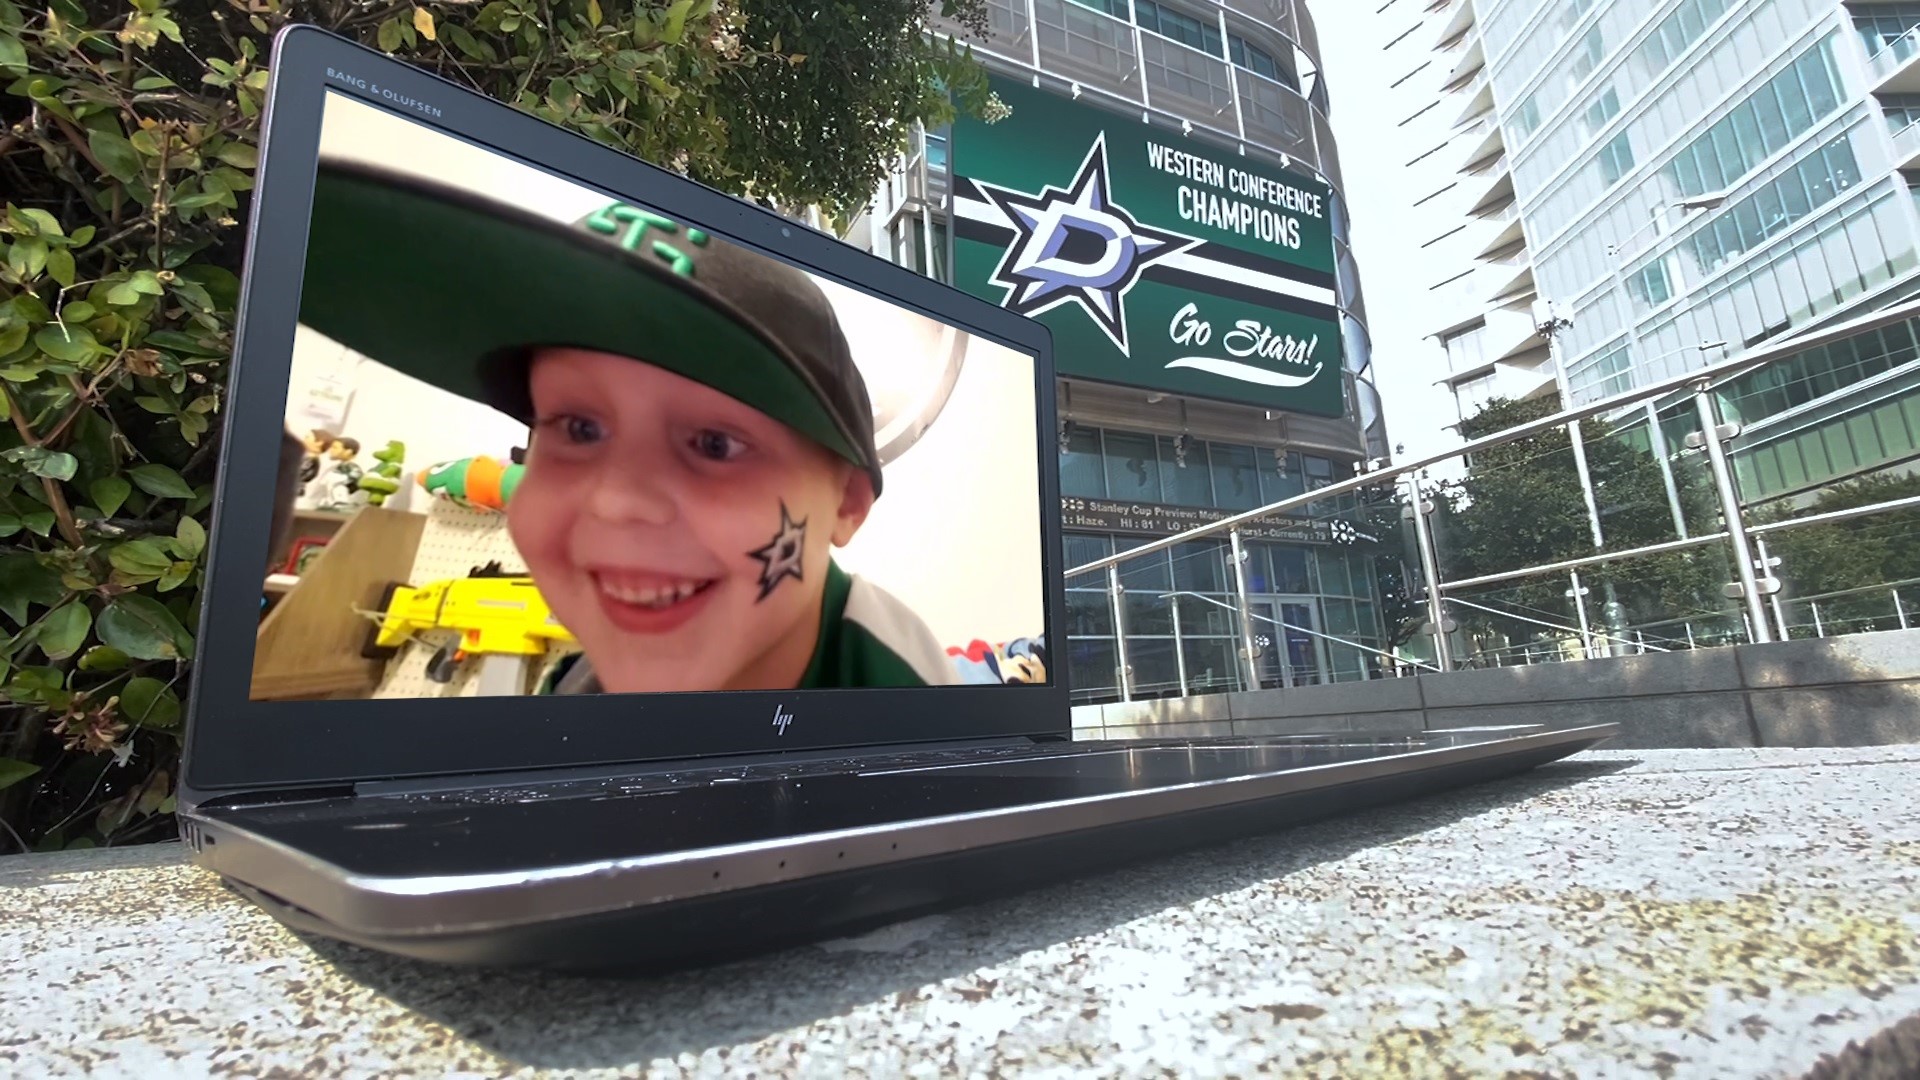 Kasen Meighen has a heart condition which keeps him away from crowds. It didn’t stop him from cheering on the Stars in the Stanley Cup Final.